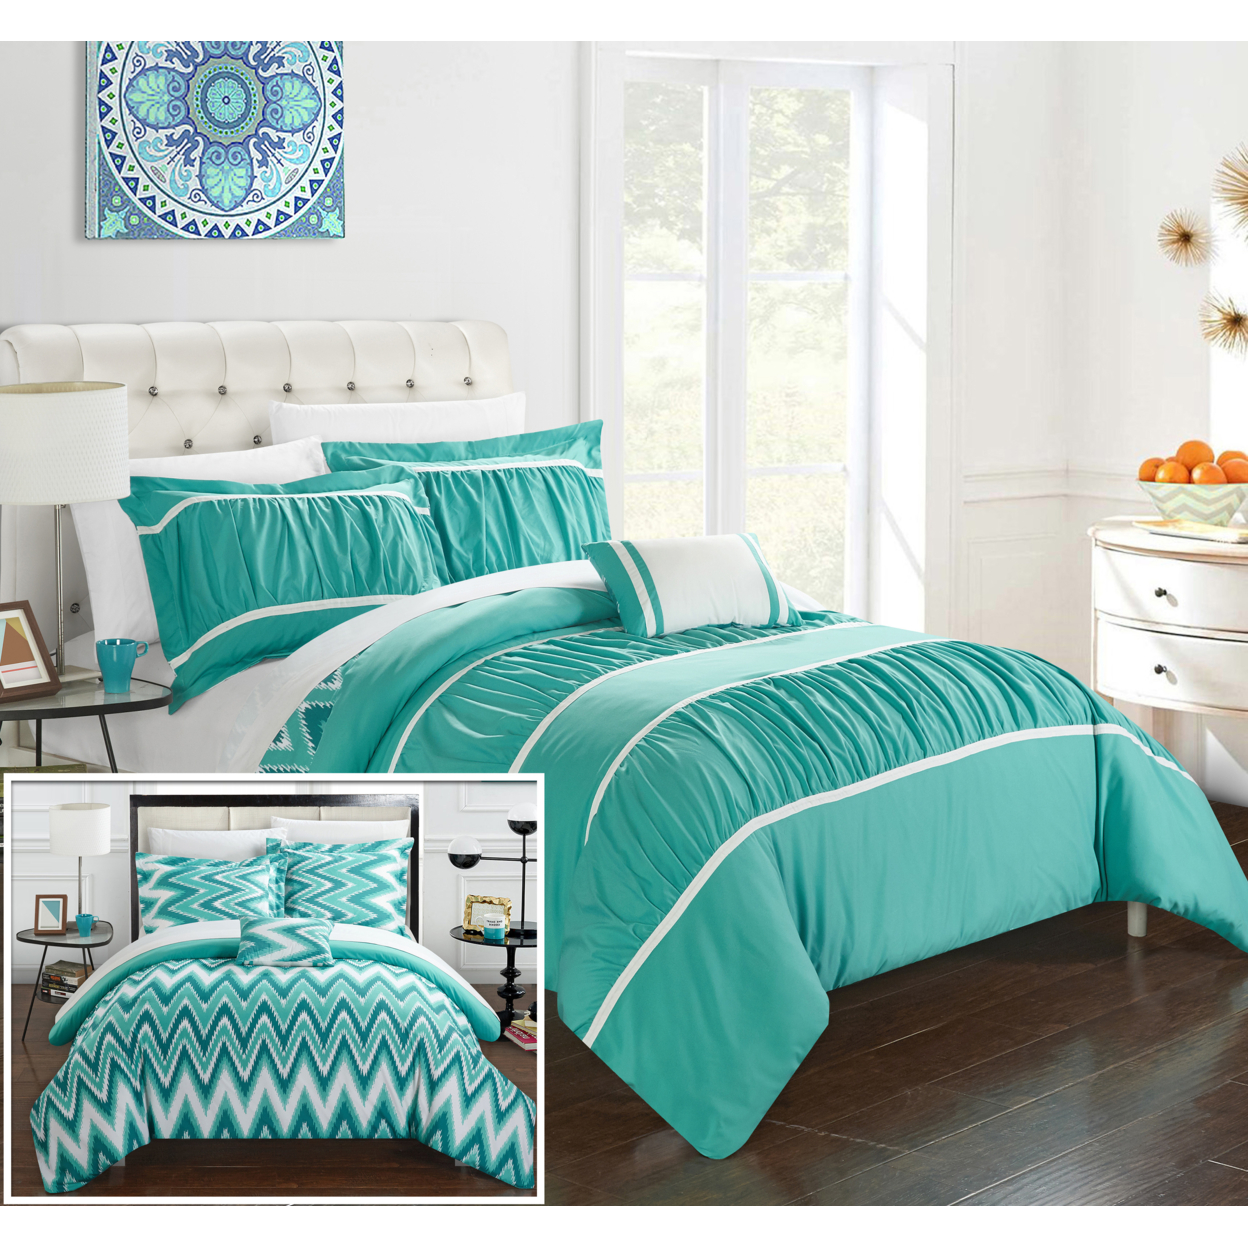 4 Or 3 Piece Lucia Pleated & Ruffled With Chevron REVERSIBLE Backing Comforter Set - Turquoise, King